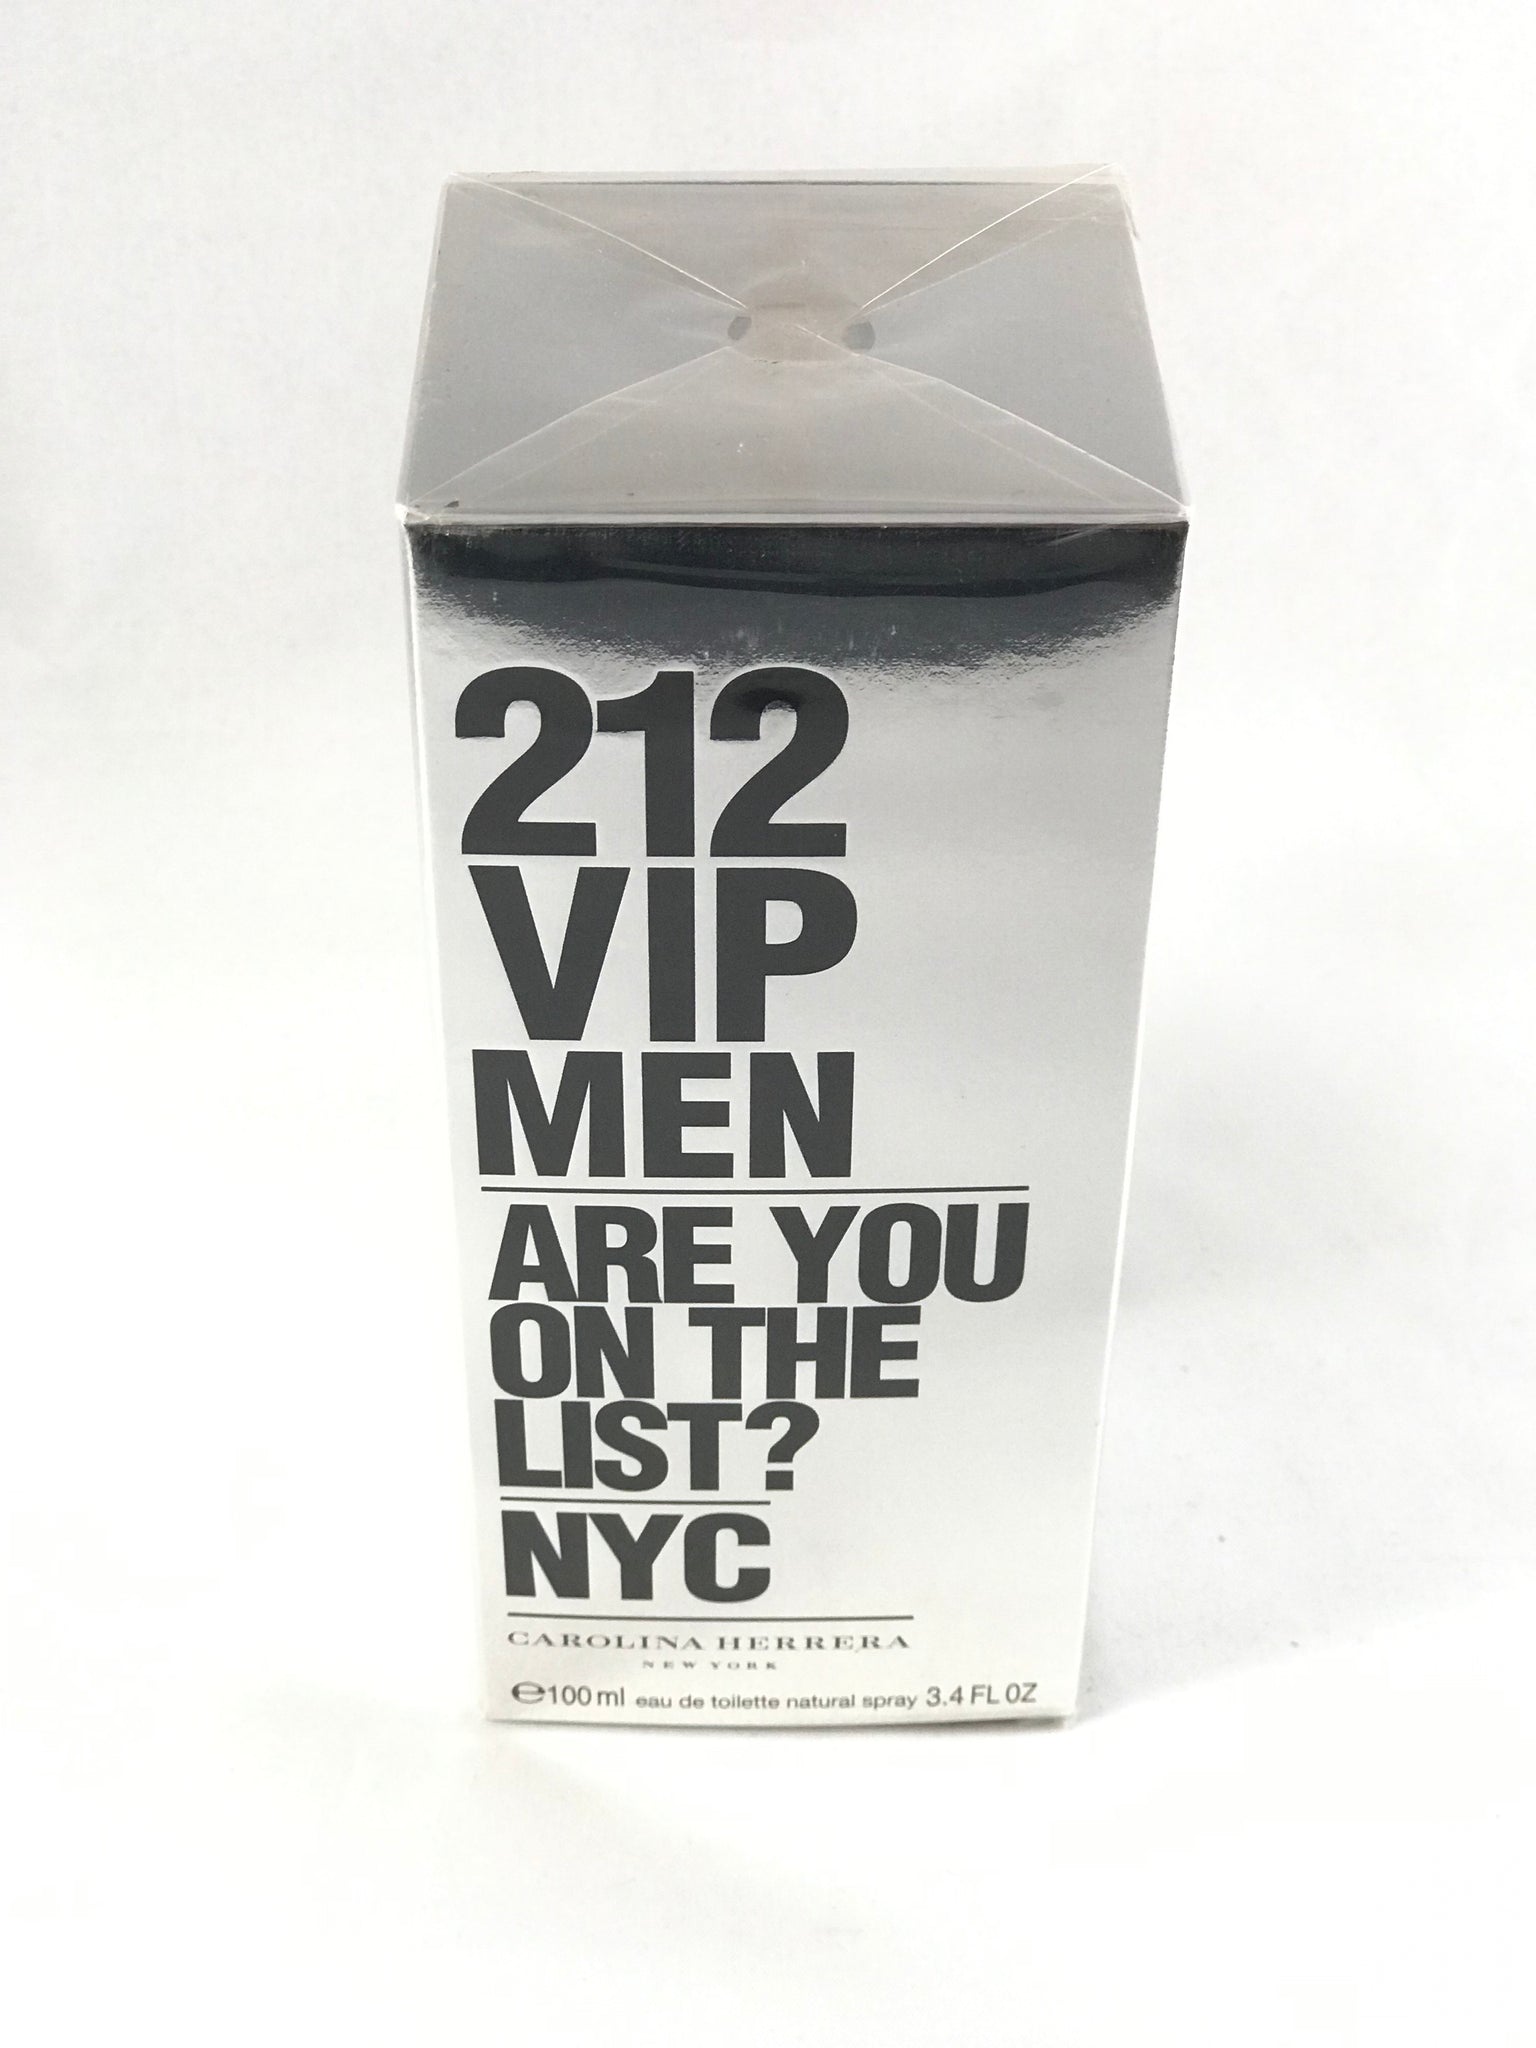 212 vip men are you on the list ? nyc Carolina Herrera EDT 3.4oz – always  special perfumes & gifts | Eau de Toilette